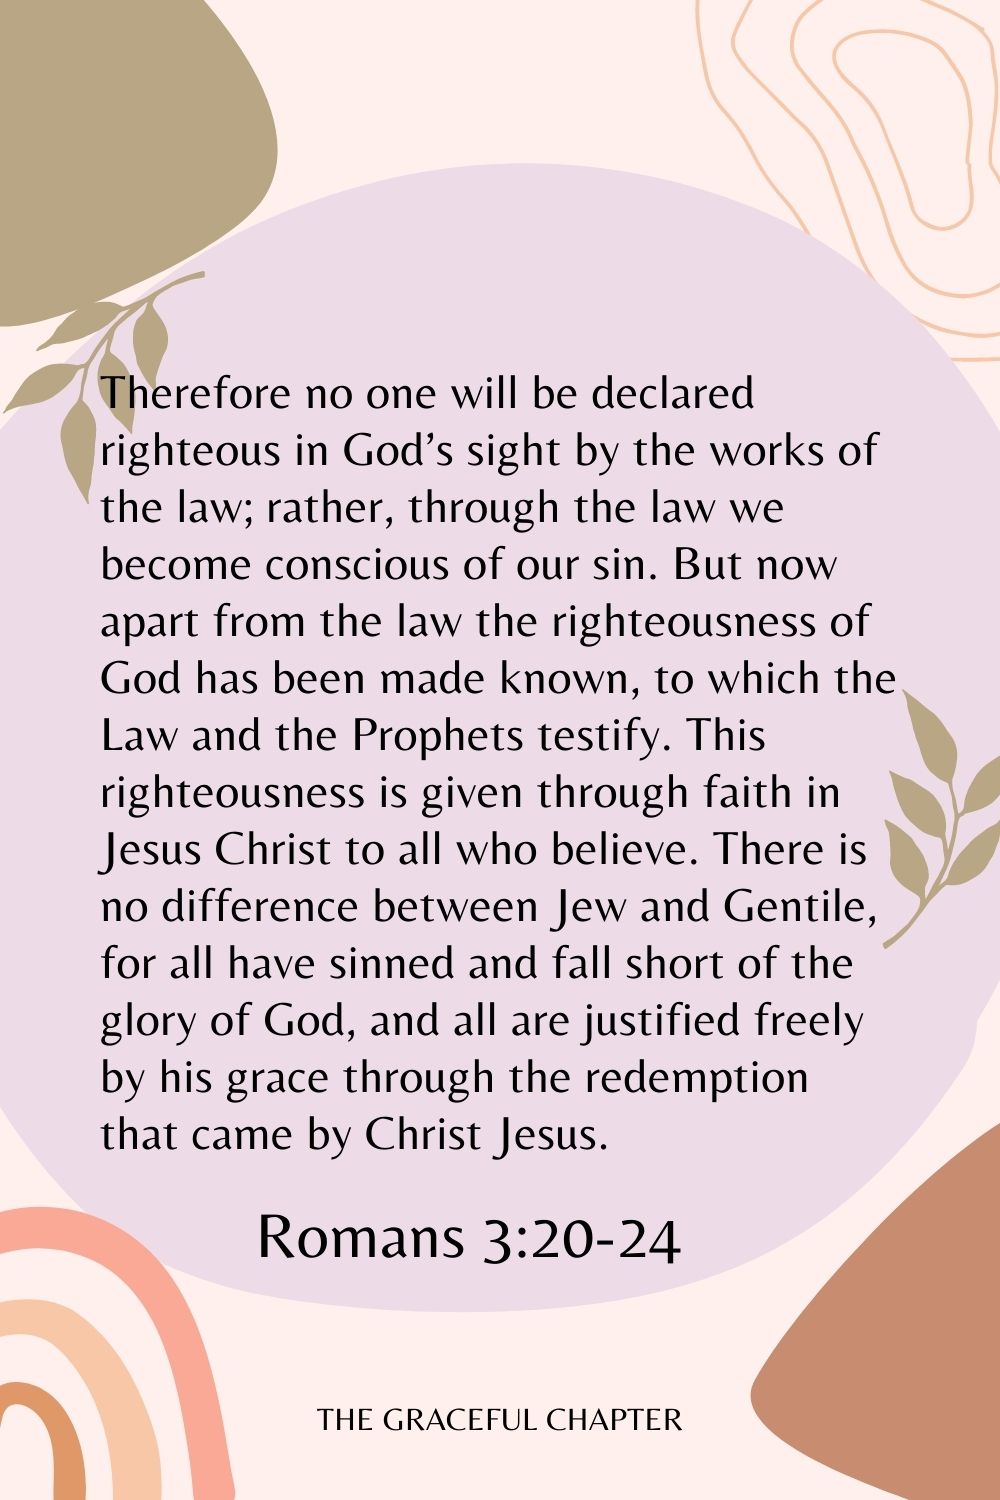 Therefore no one will be declared righteous in God’s sight by the works of the law; rather, through the law we become conscious of our sin. But now apart from the law the righteousness of God has been made known, to which the Law and the Prophets testify. This righteousness is given through faith in Jesus Christ to all who believe. There is no difference between Jew and Gentile, for all have sinned and fall short of the glory of God, and all are justified freely by his grace through the redemption that came by Christ Jesus. Romans 3:20-24